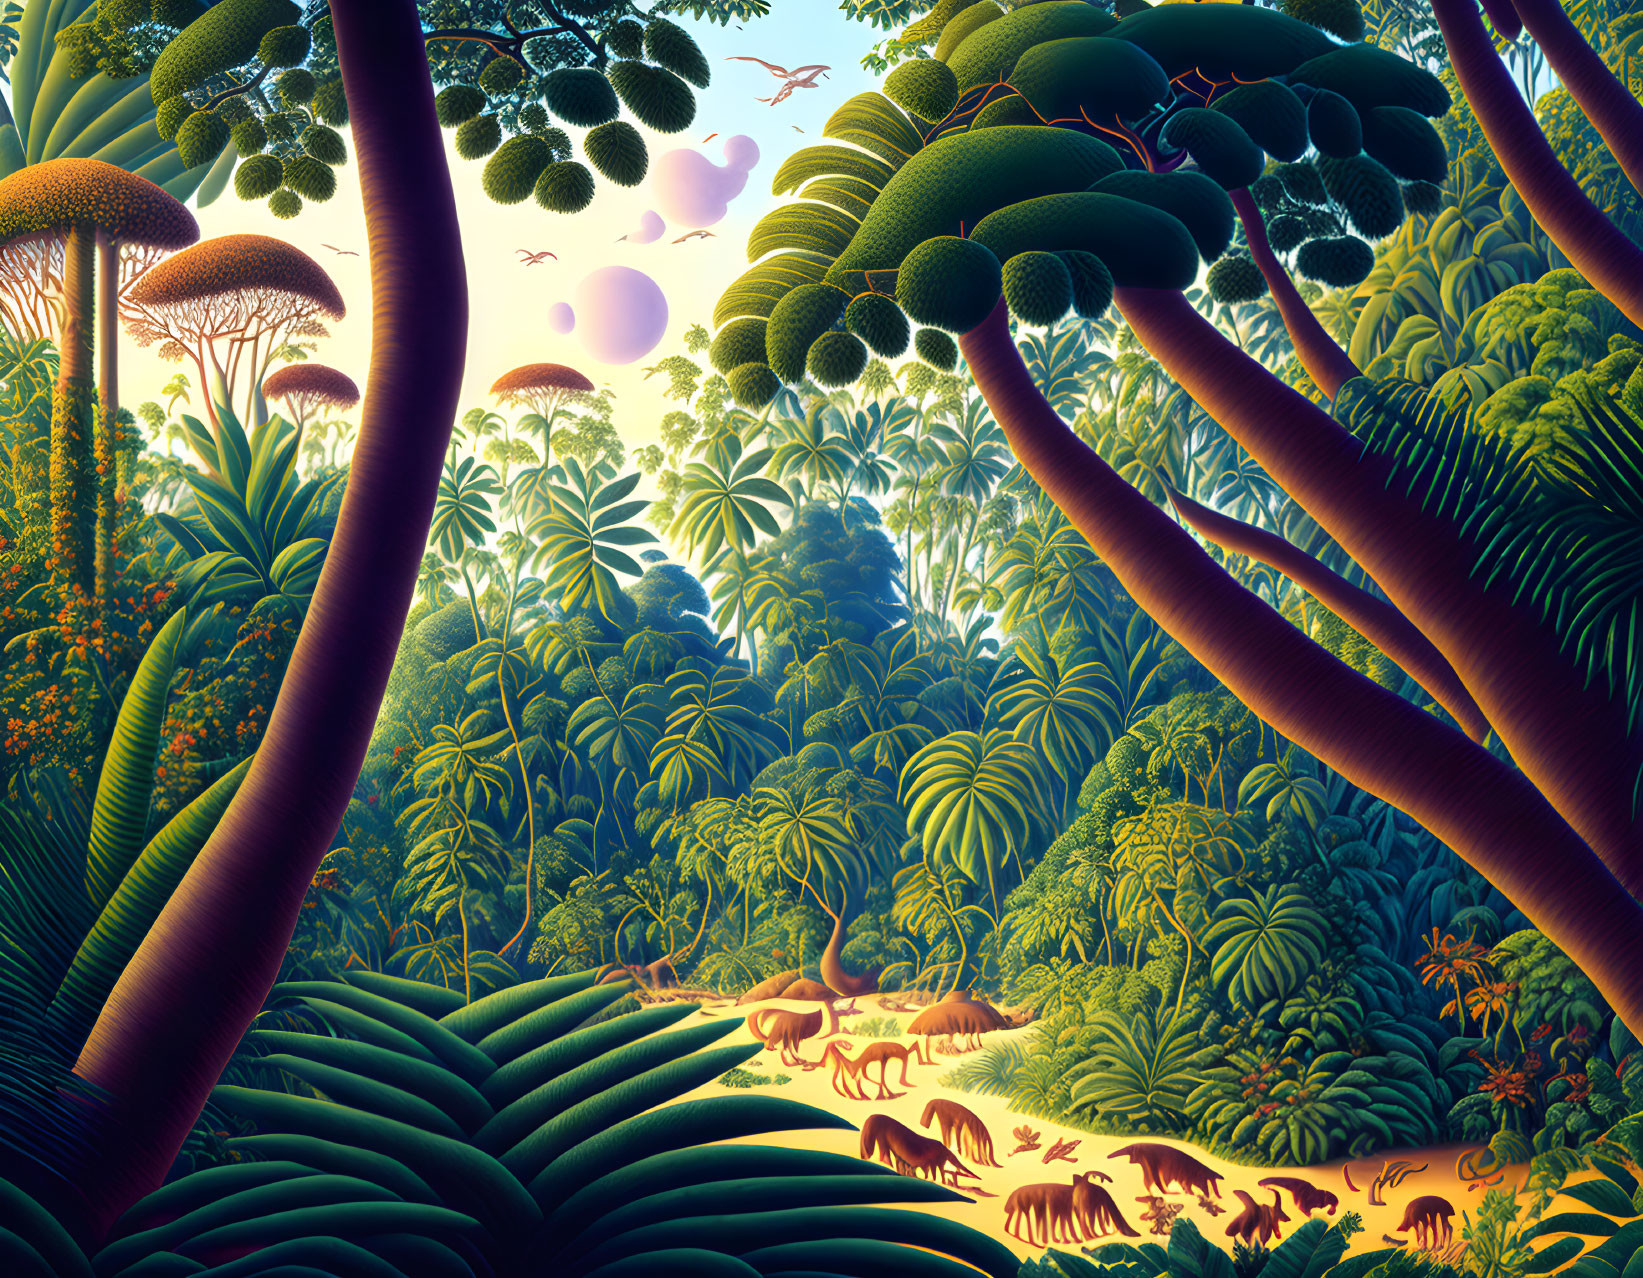 Vibrant jungle illustration with towering trees, mushrooms, pink sky, and roaming creatures